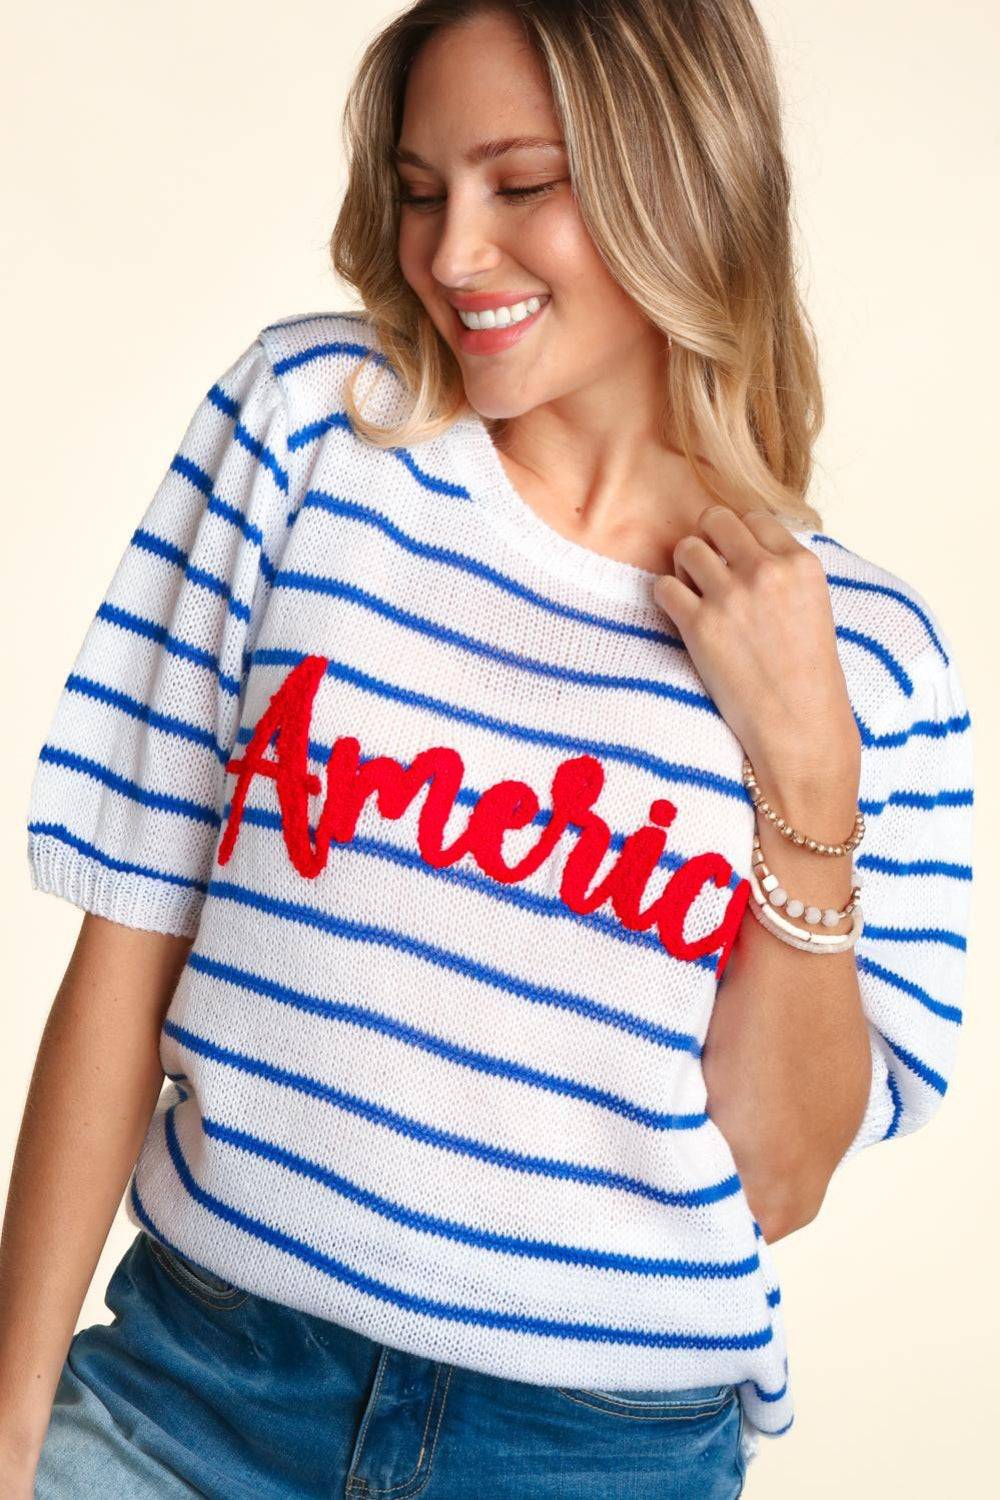 a woman wearing a sweater with the word america on it